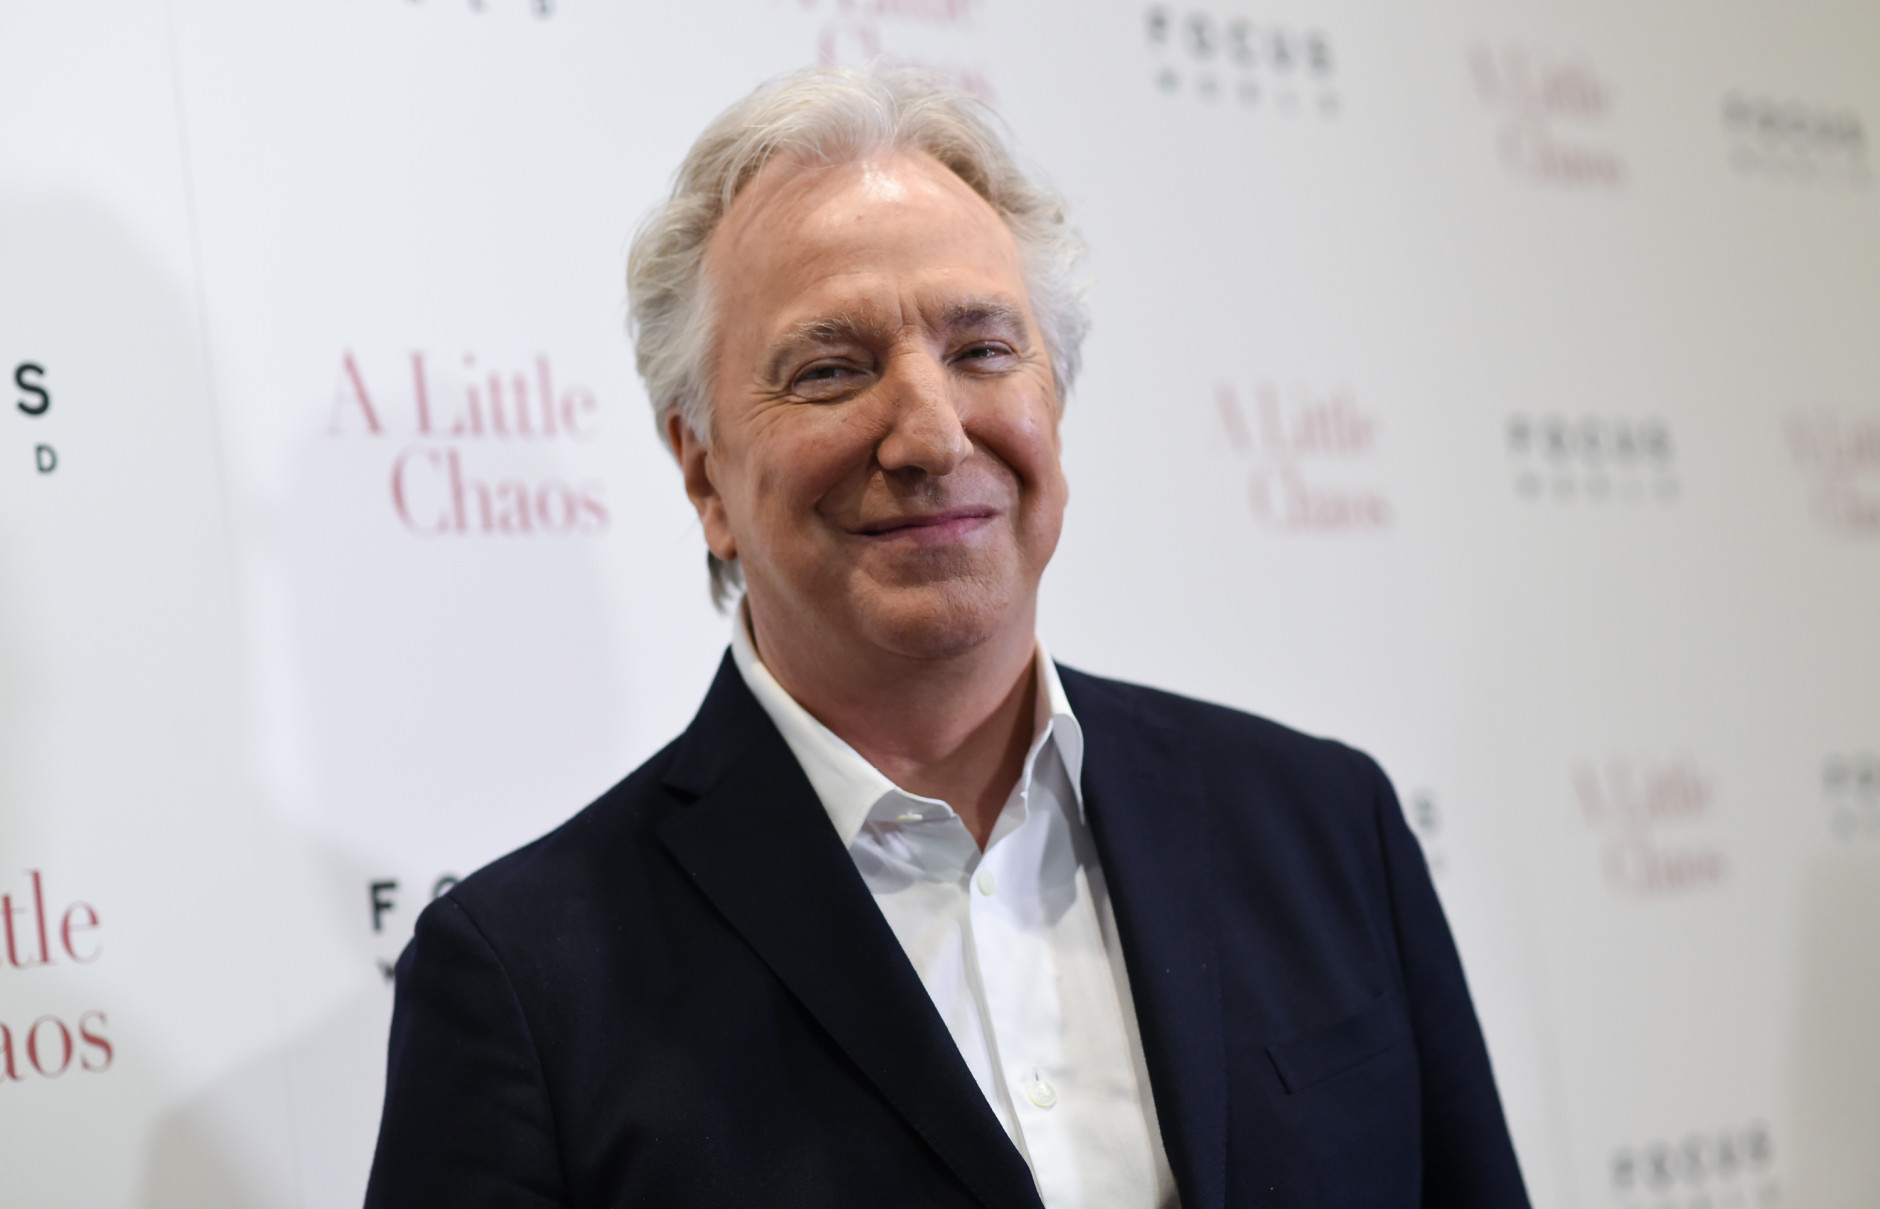 Actor Alan Rickman attends the premiere of "A Little Chaos" at the Museum of Modern Art on Wednesday, June 17, 2015, in New York. (Photo by Evan Agostini/Invision/AP)